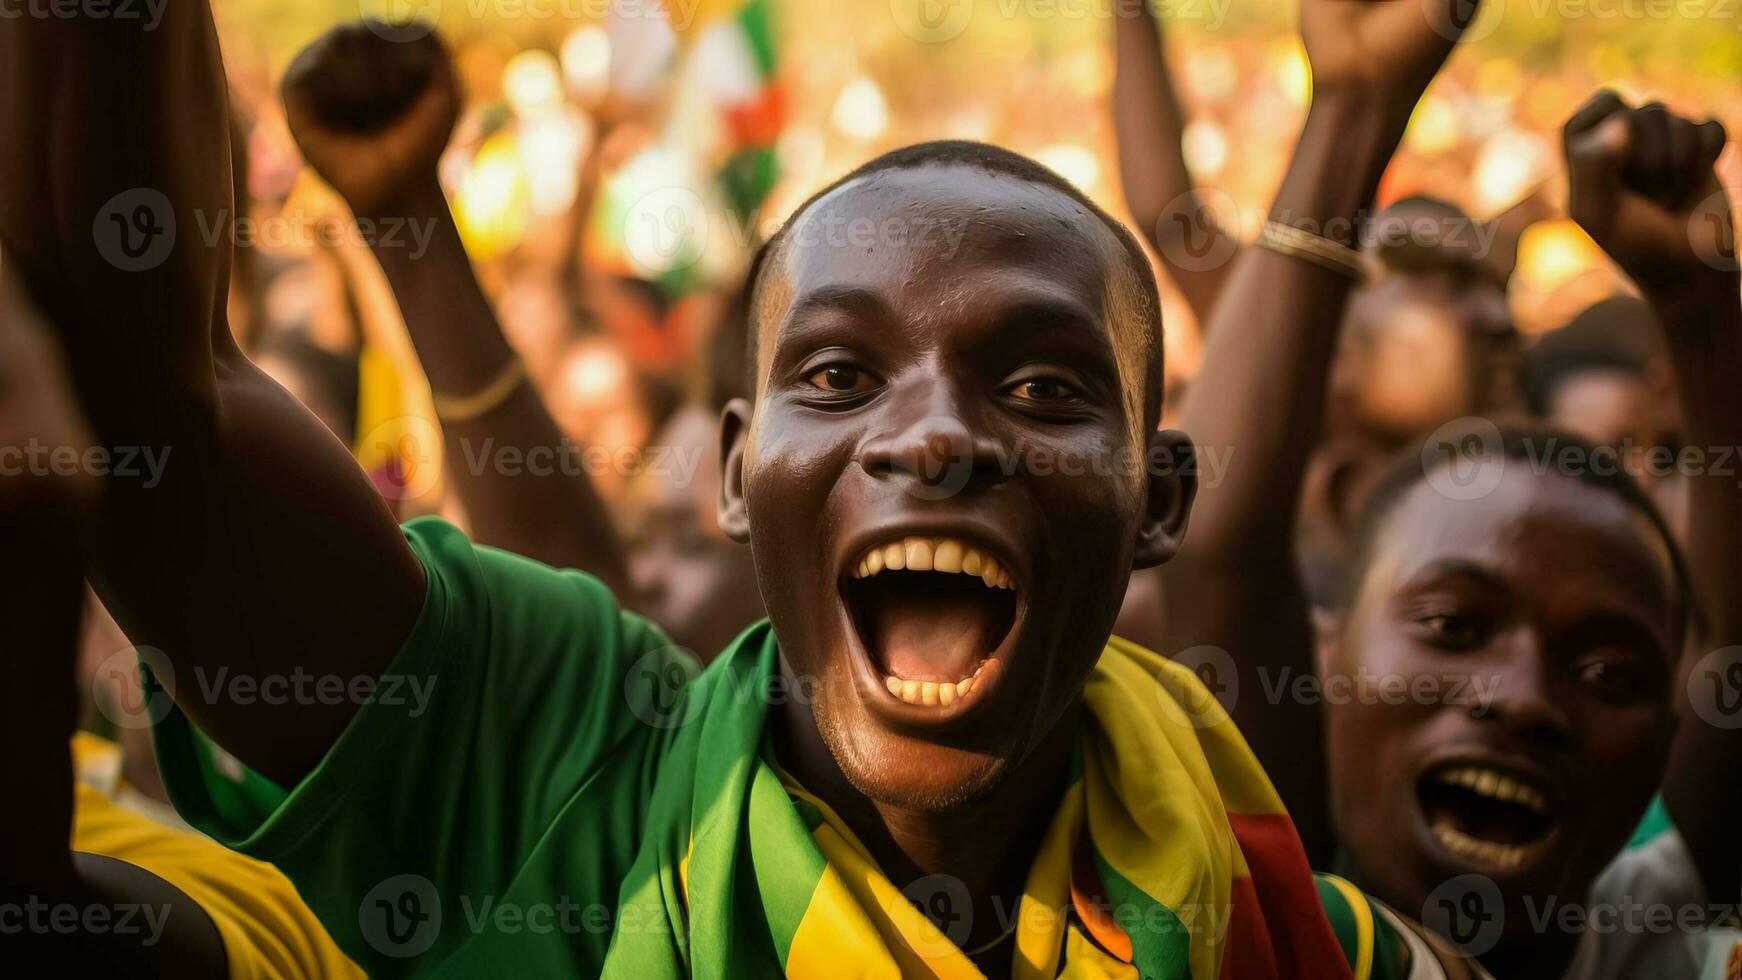 Burkinabe football fans celebrating a victory photo